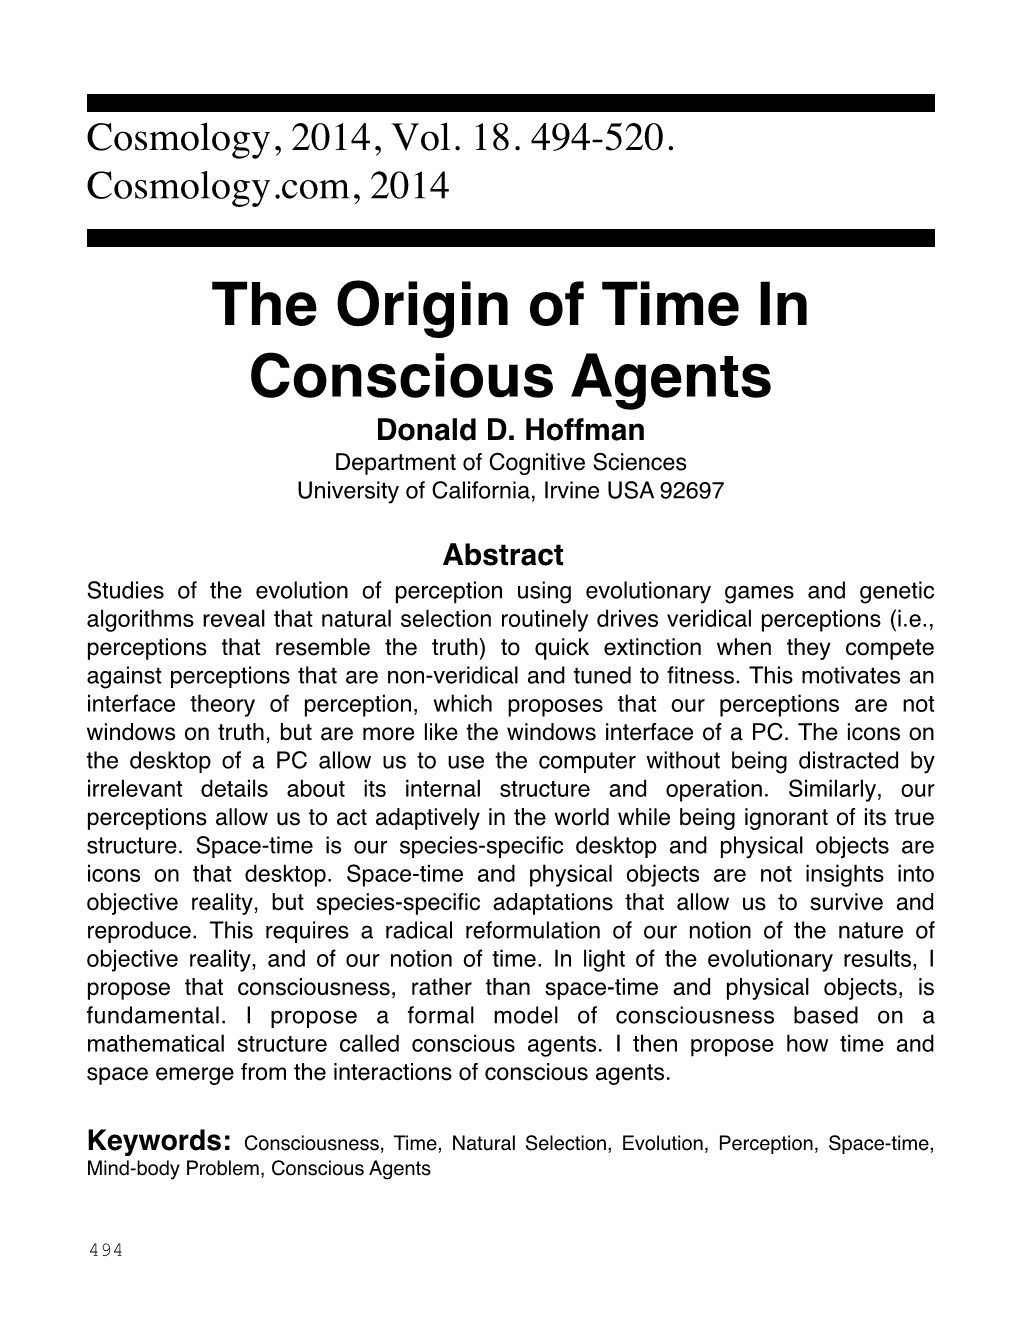 The Origin of Time in Conscious Agents Donald D